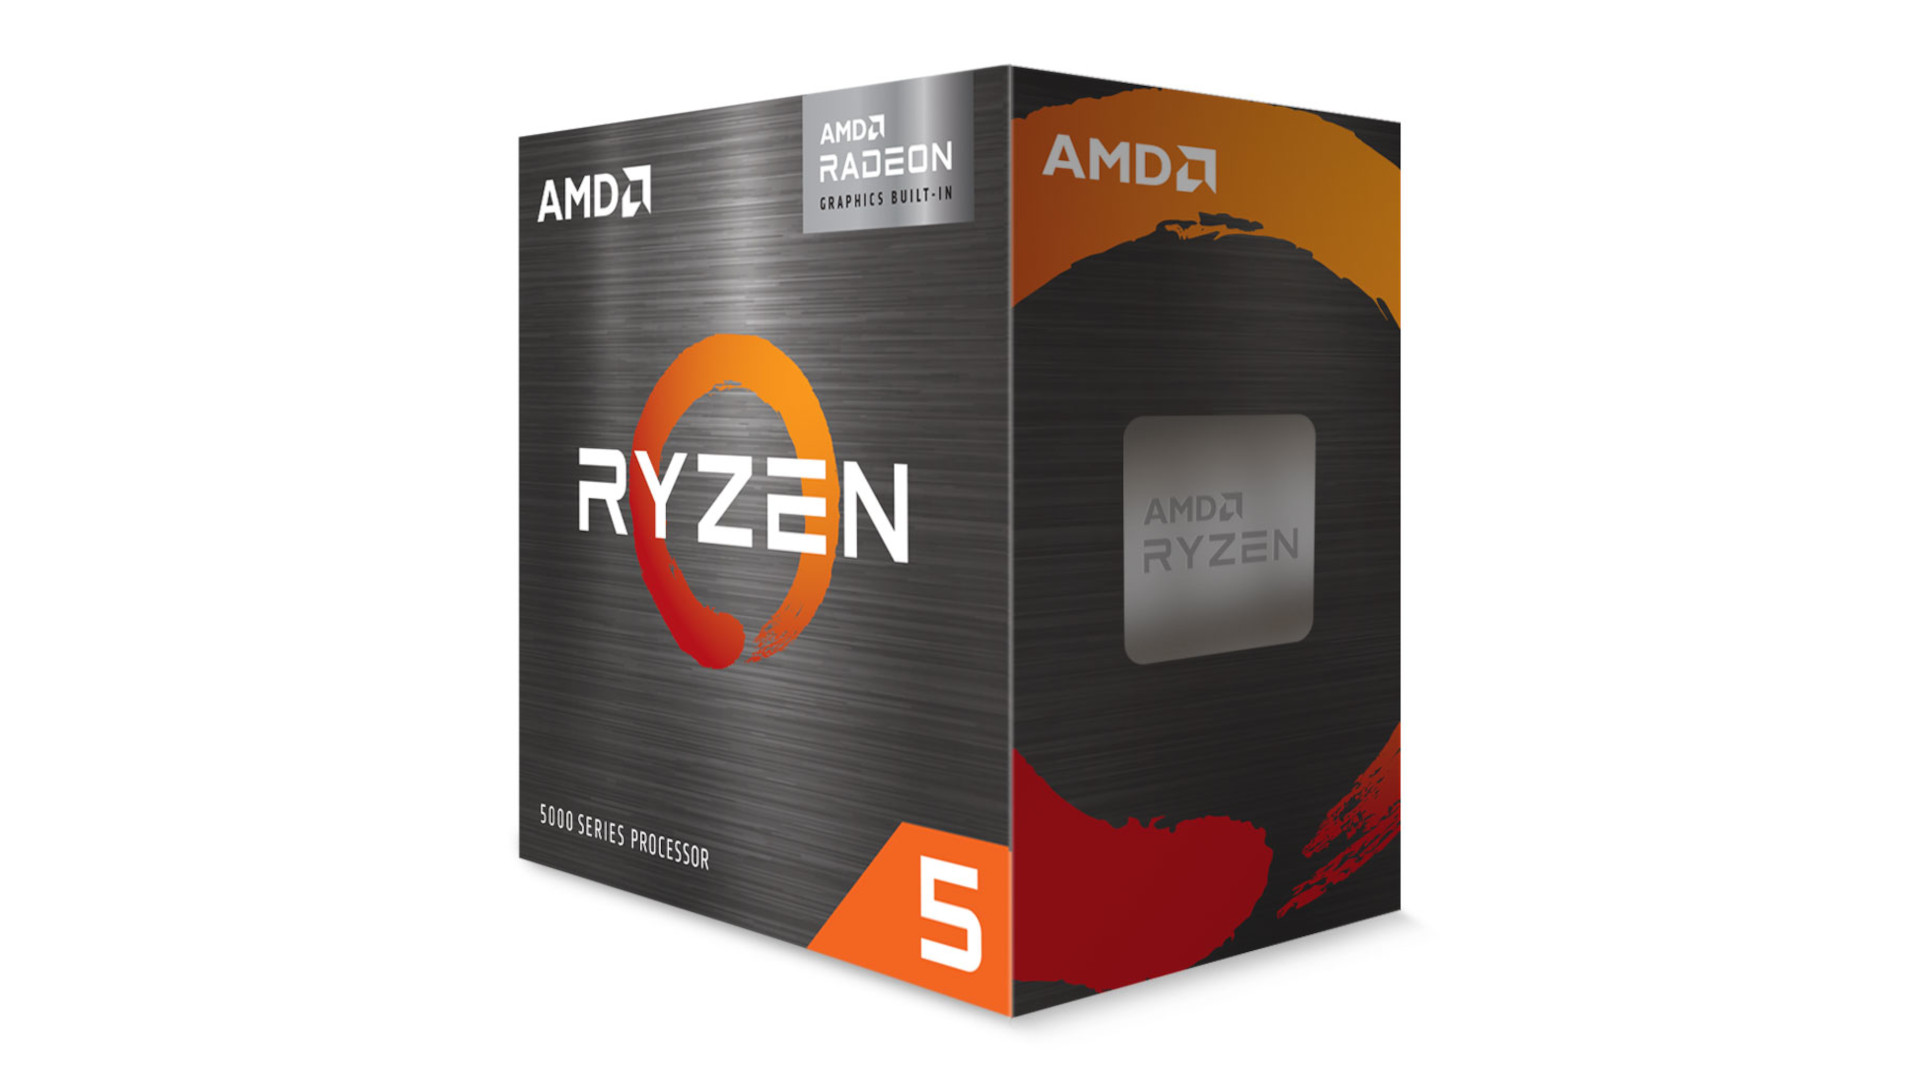 The best CPU with integrated graphics is the AMD Ryzen 5 5600G